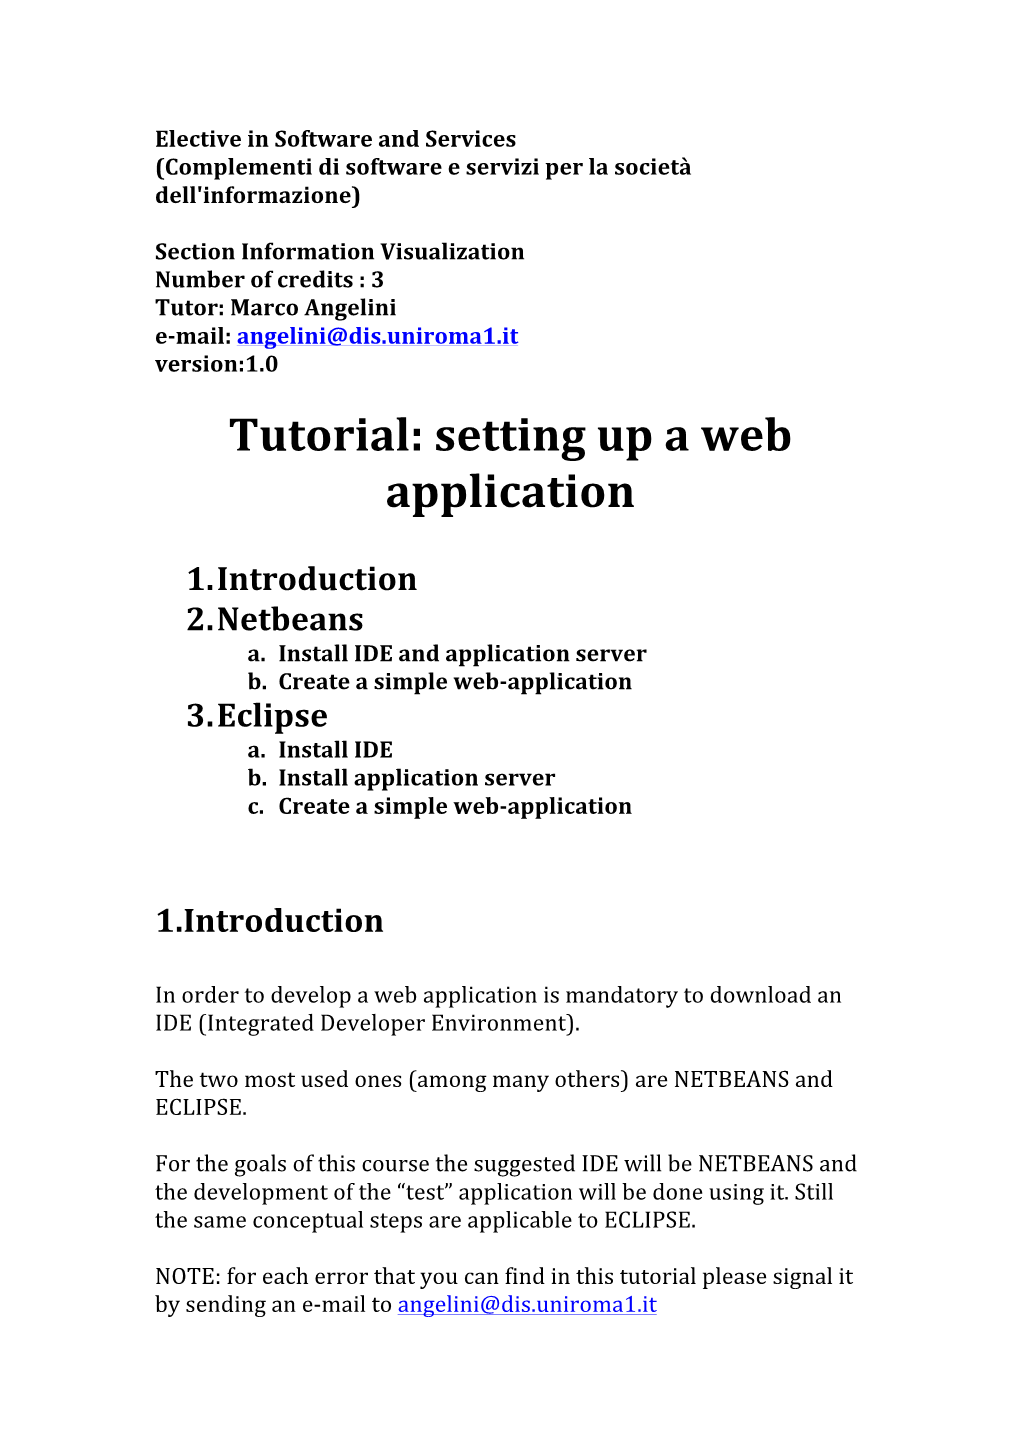 Tutorial: Setting up a Web Application